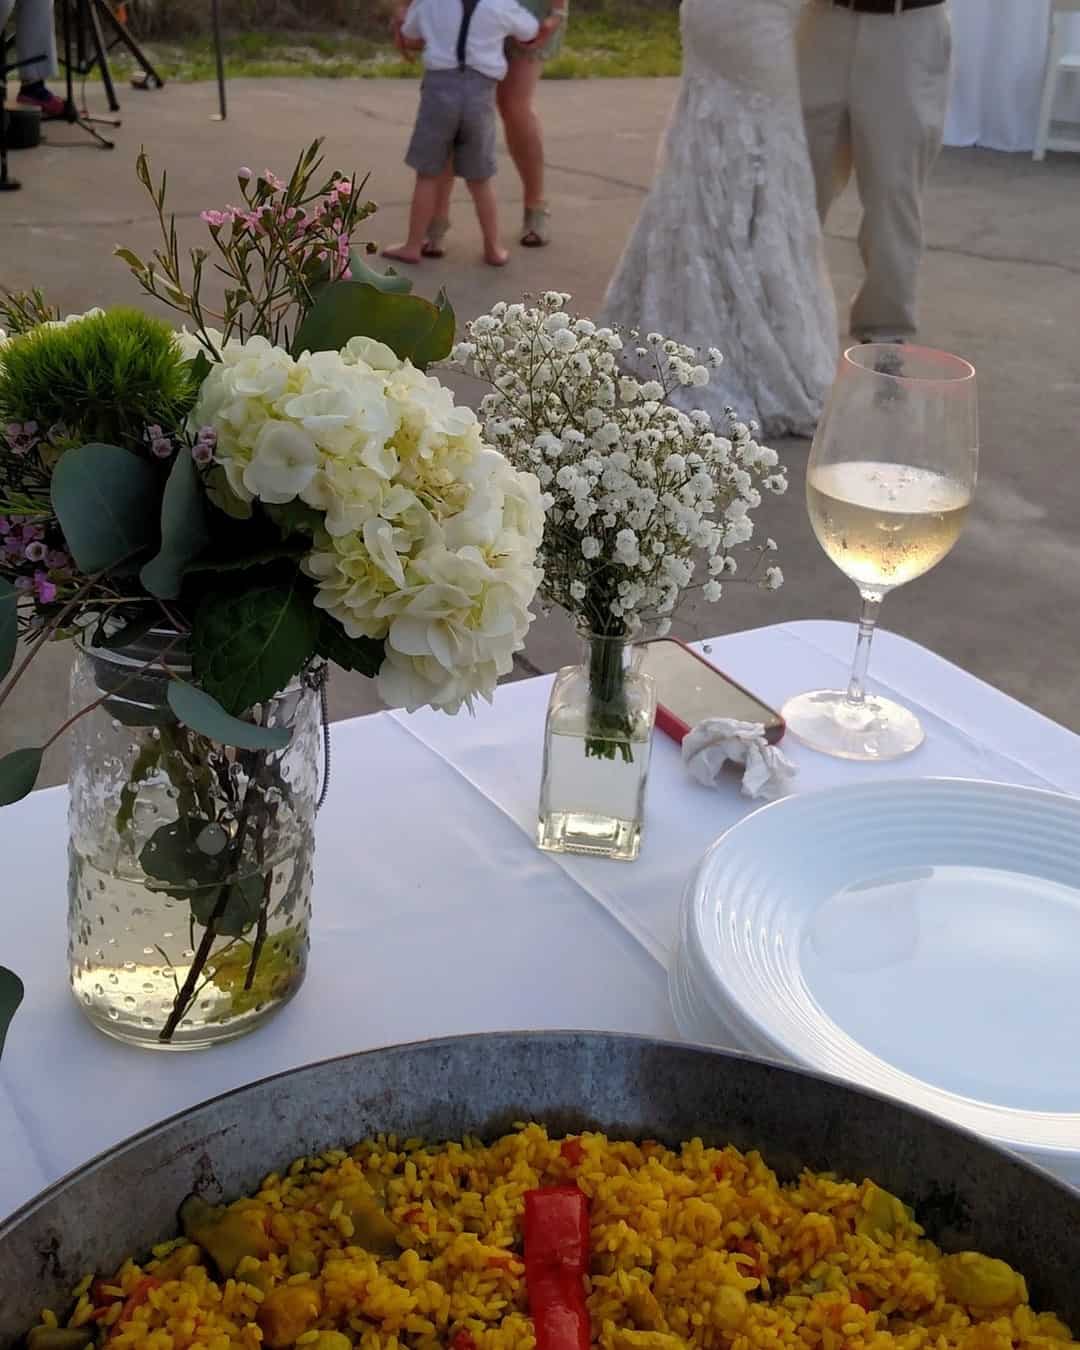 With spring right around the corner, so is wedding season! When you hire Real Paella to cater your wedding, you'll have the whole party falling in love with our delicious appetizers,  paellas, and desserts!
#realpaella #weddingseason #weddingcaterer #northfloridaweddings